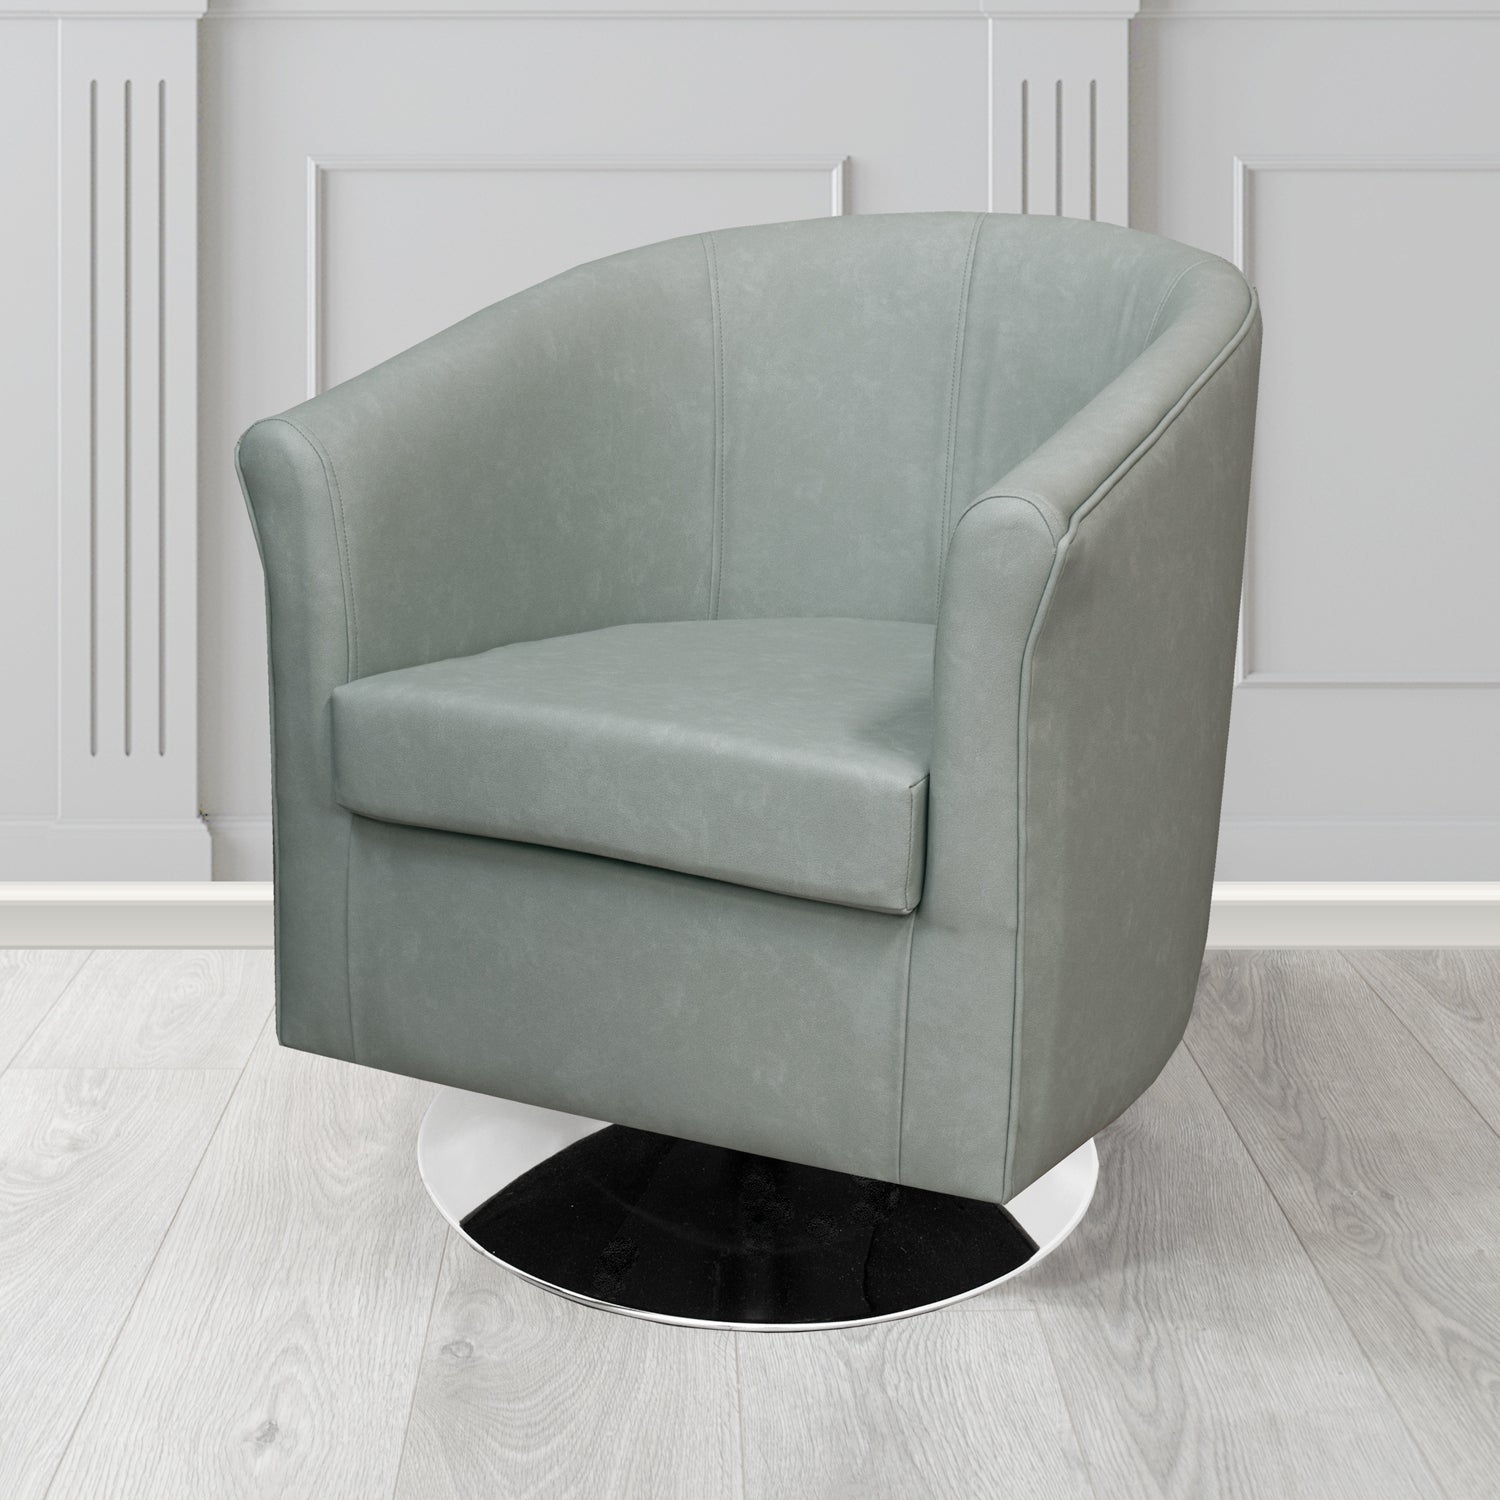 Tuscany Swivel Tub Chair in Infiniti Shadow INF1858 Antimicrobial Crib 5 Faux Leather - The Tub Chair Shop